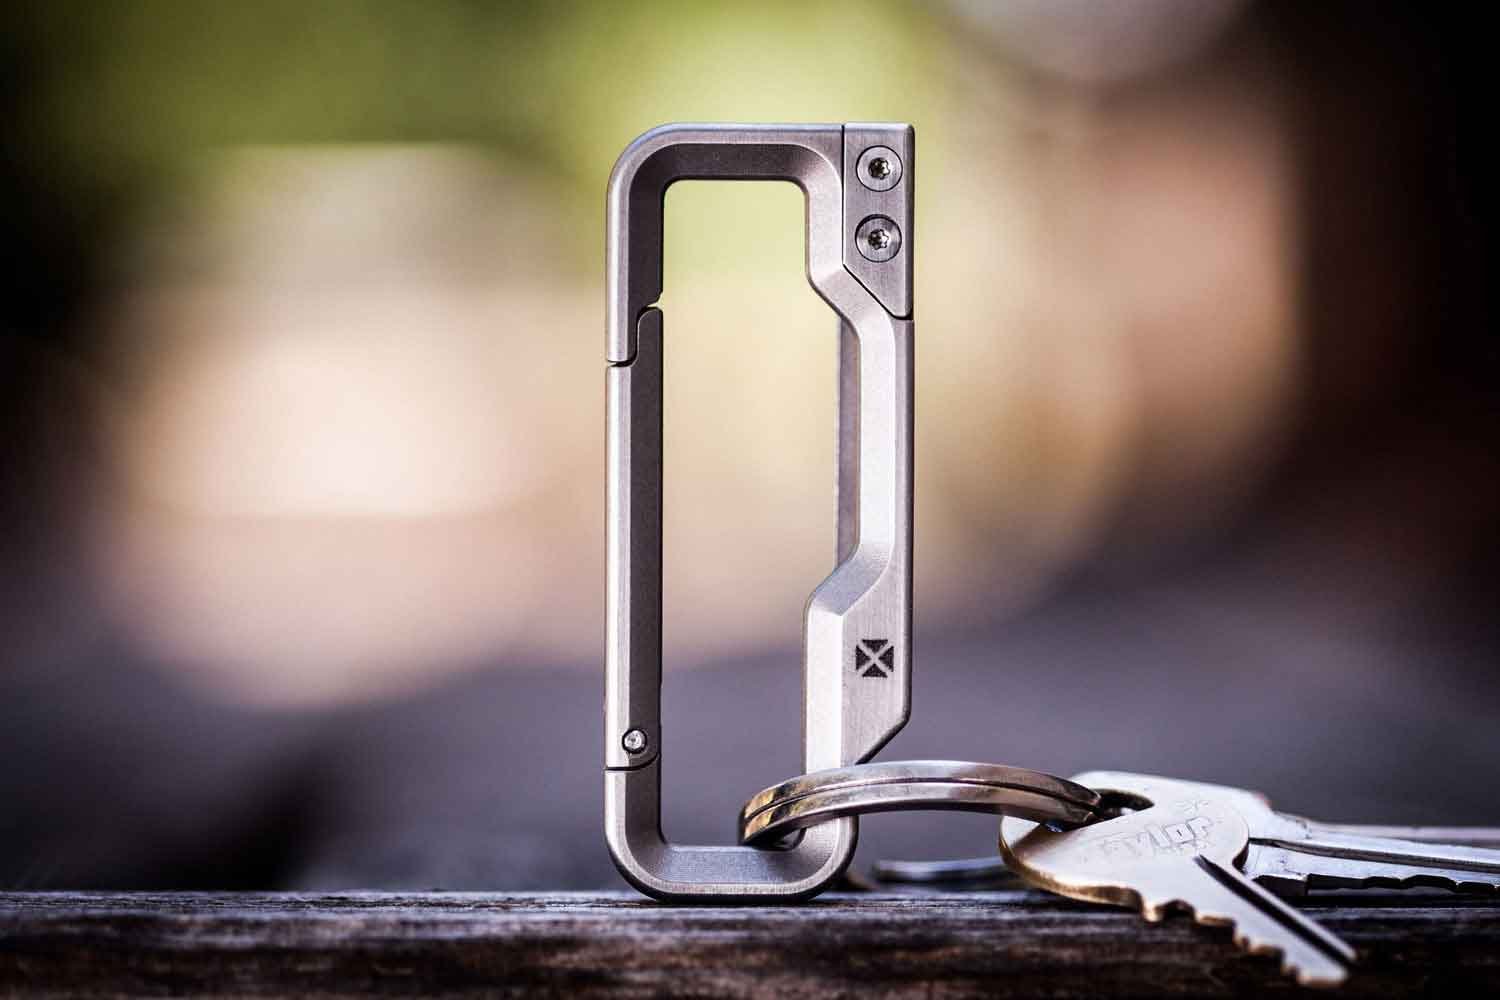 HyperLink carabiner keychain standing up with keys.